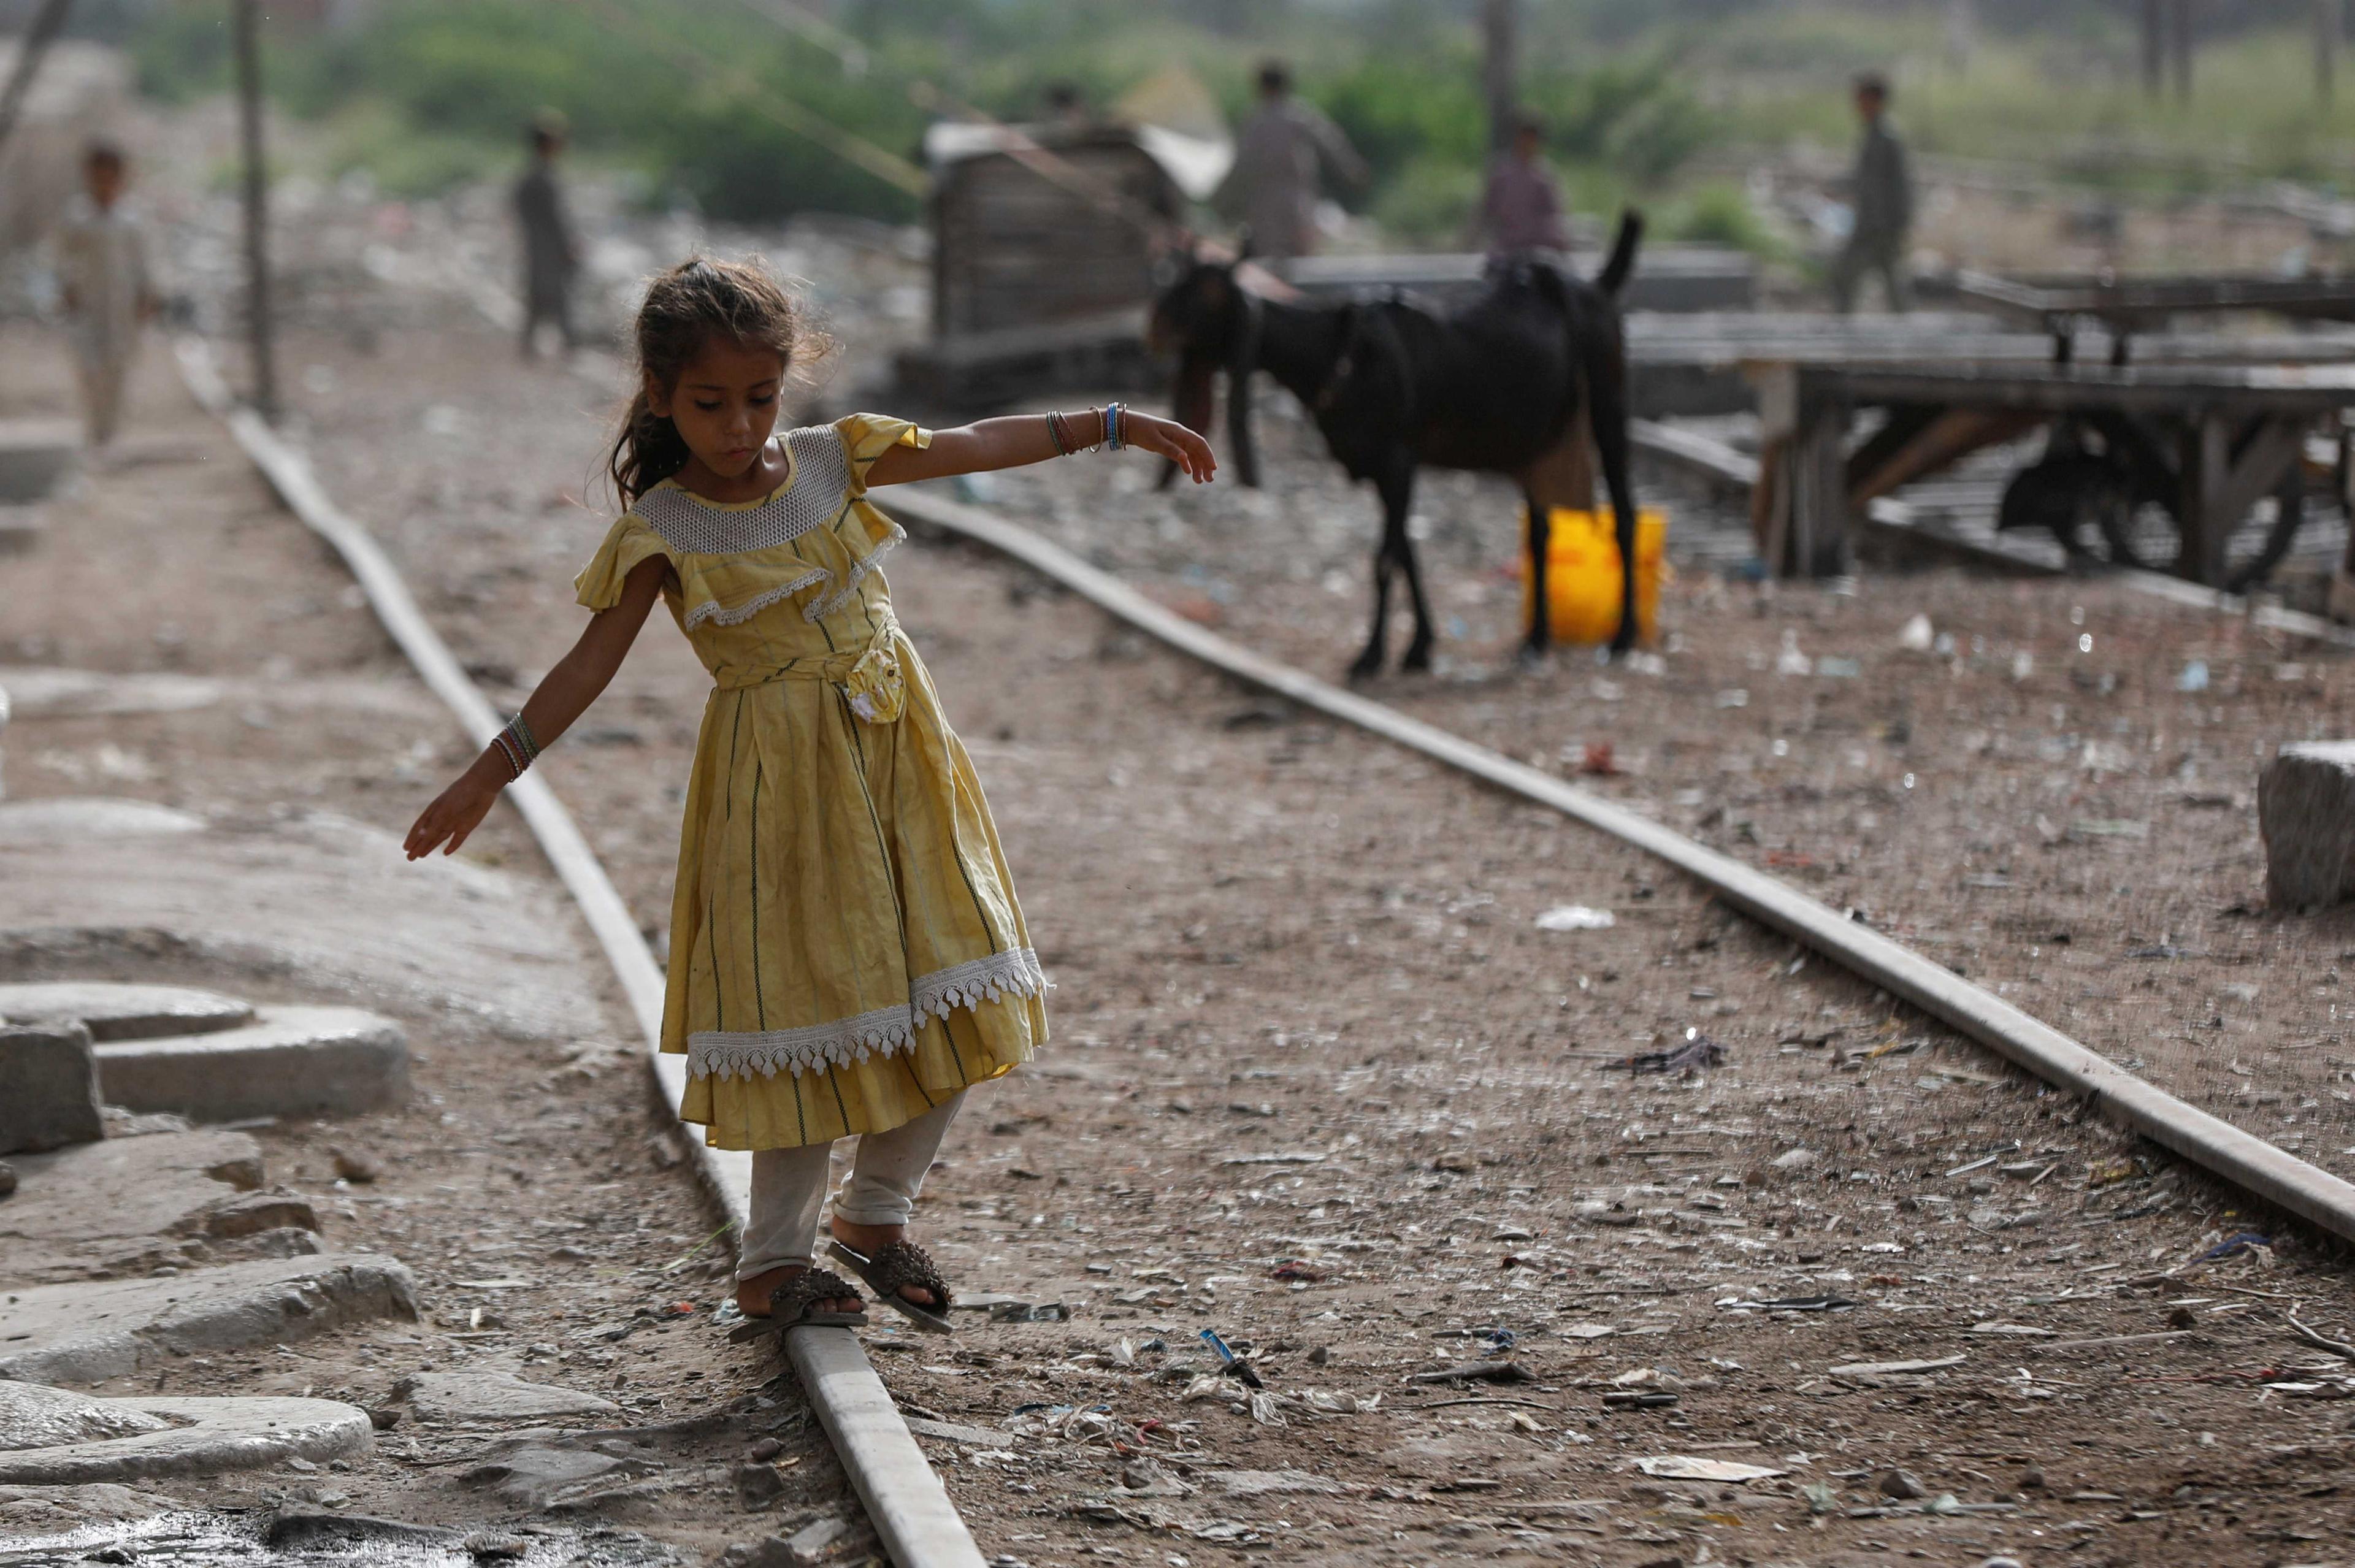 A girl balances herself while walking on an abandoned railway track in a slum area in Karachi, Pakistan July 10. Photo: Reuters